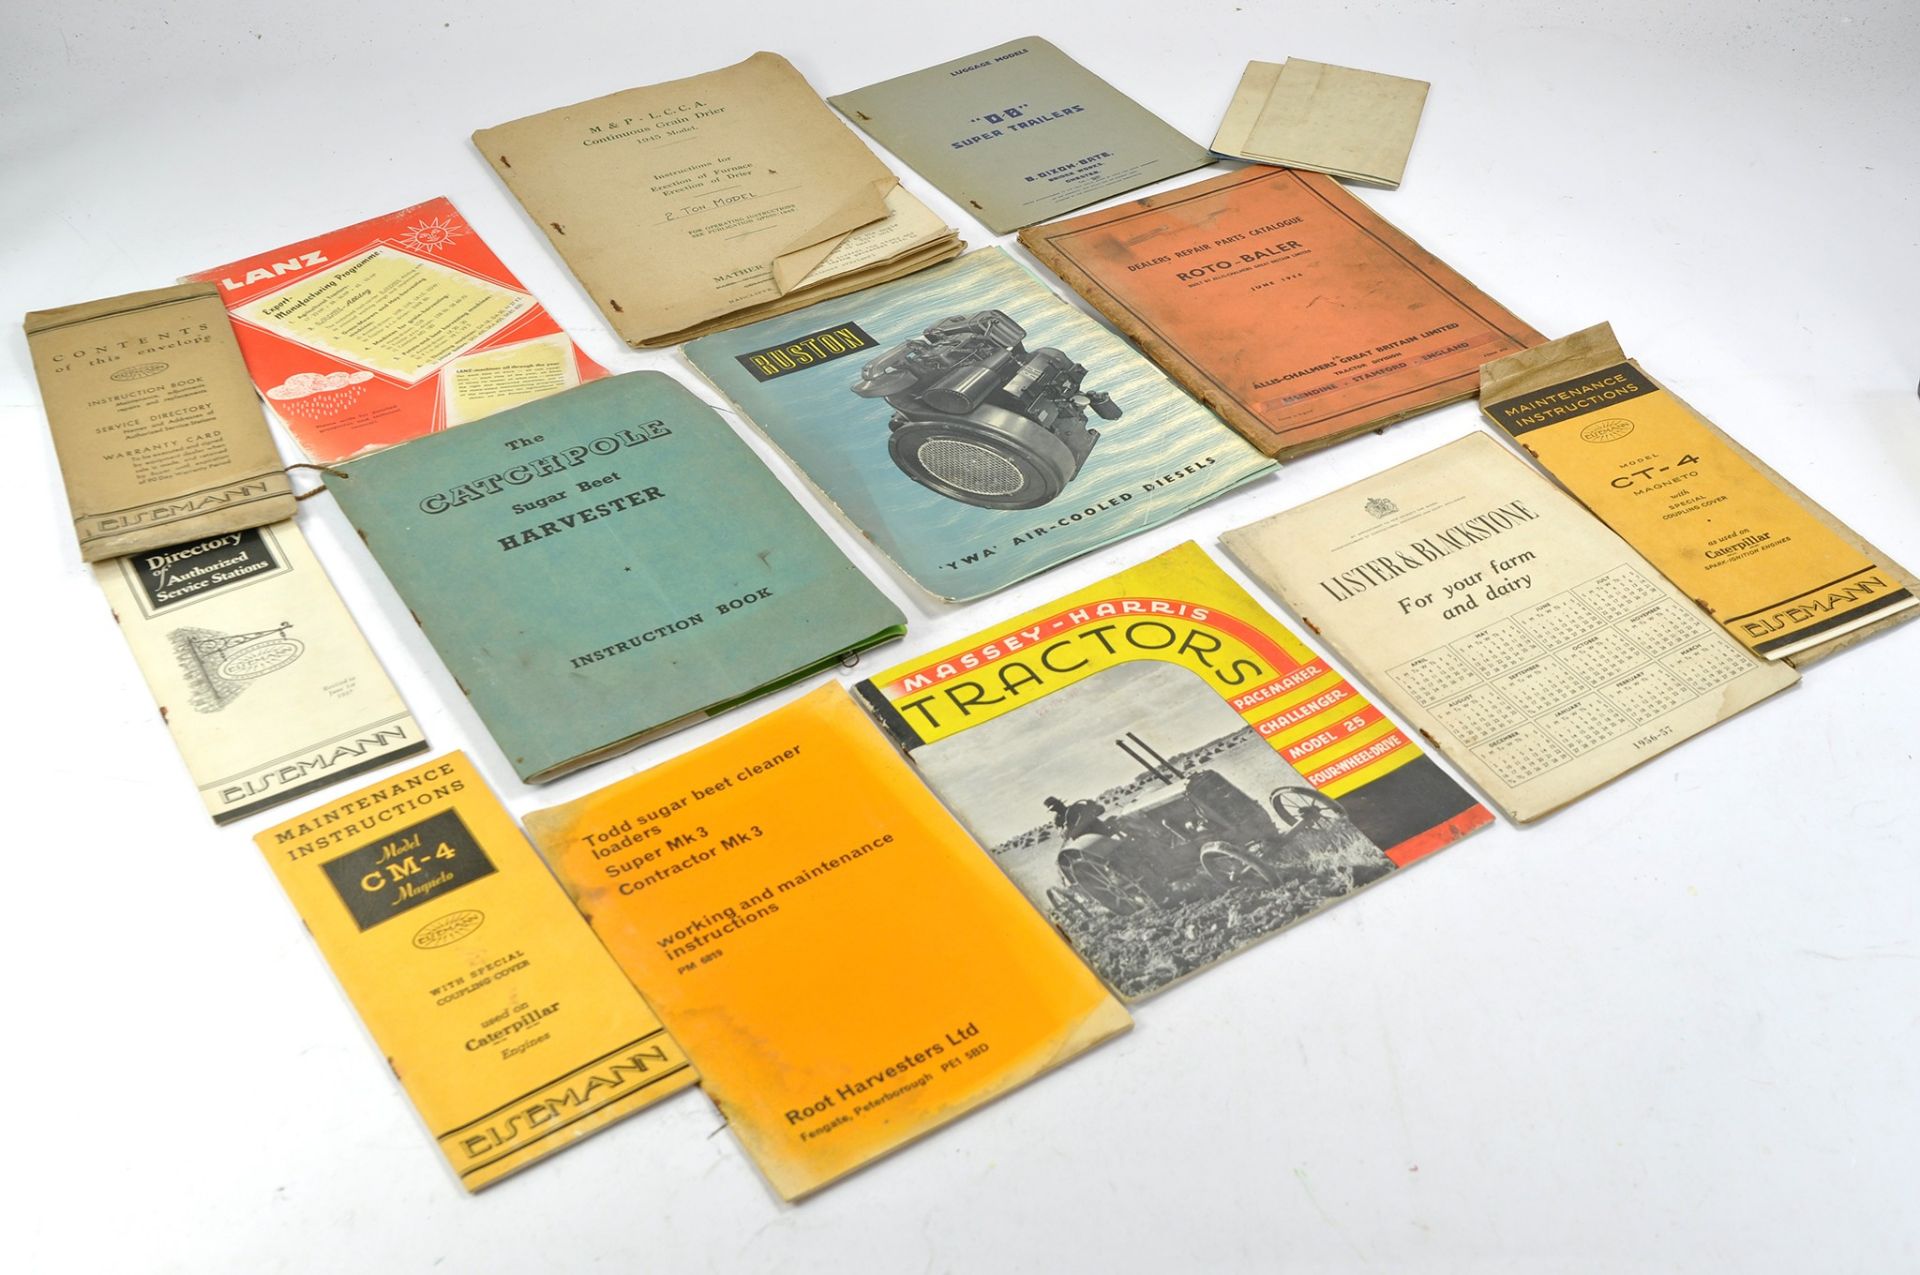 Further interesting assortment of hard to find Vintage Tractor and Machinery related literature